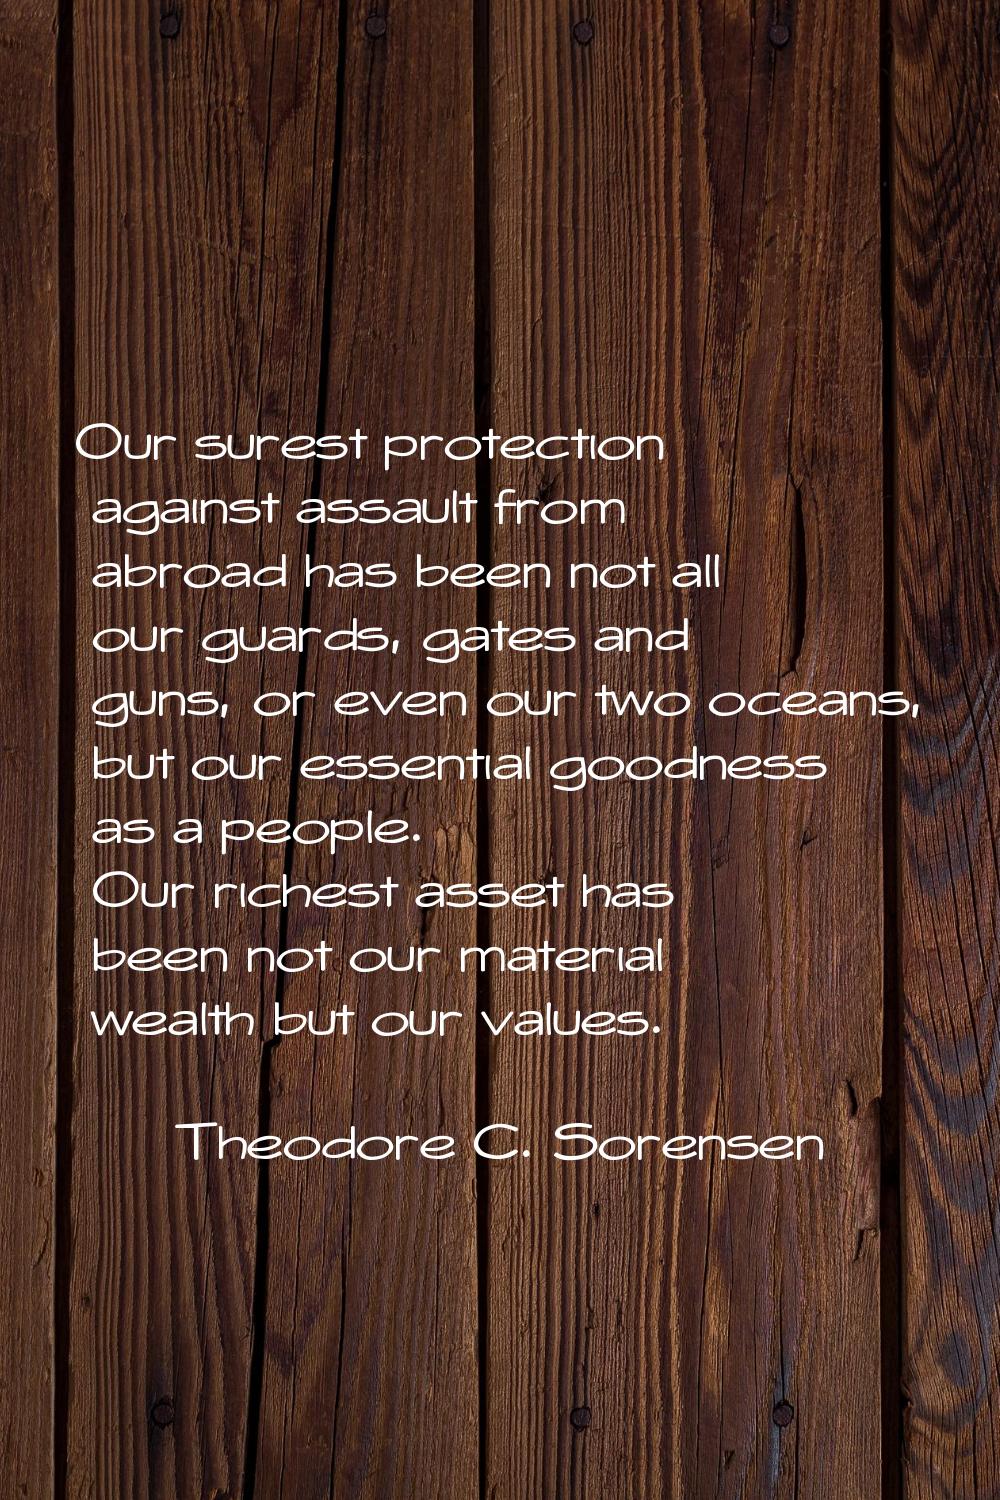 Our surest protection against assault from abroad has been not all our guards, gates and guns, or e